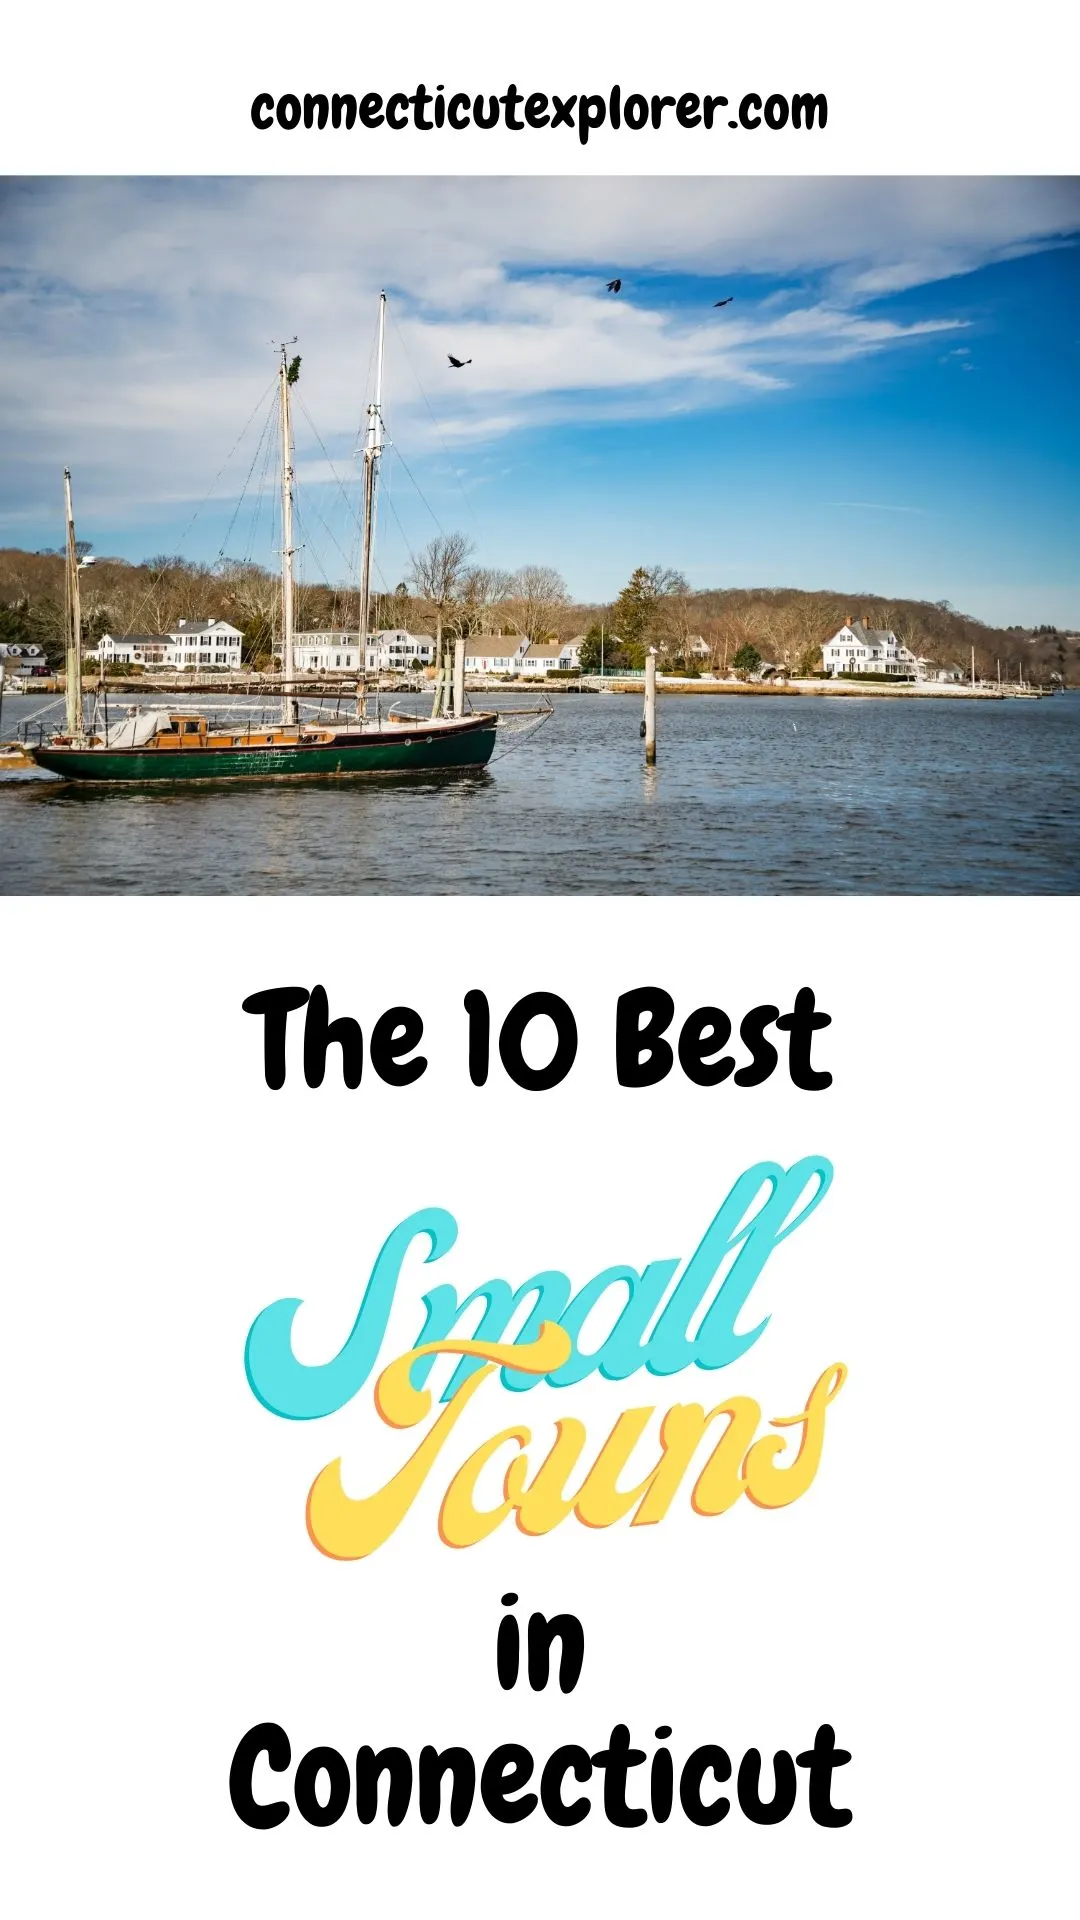 10 best small towns in ct pinterest image.